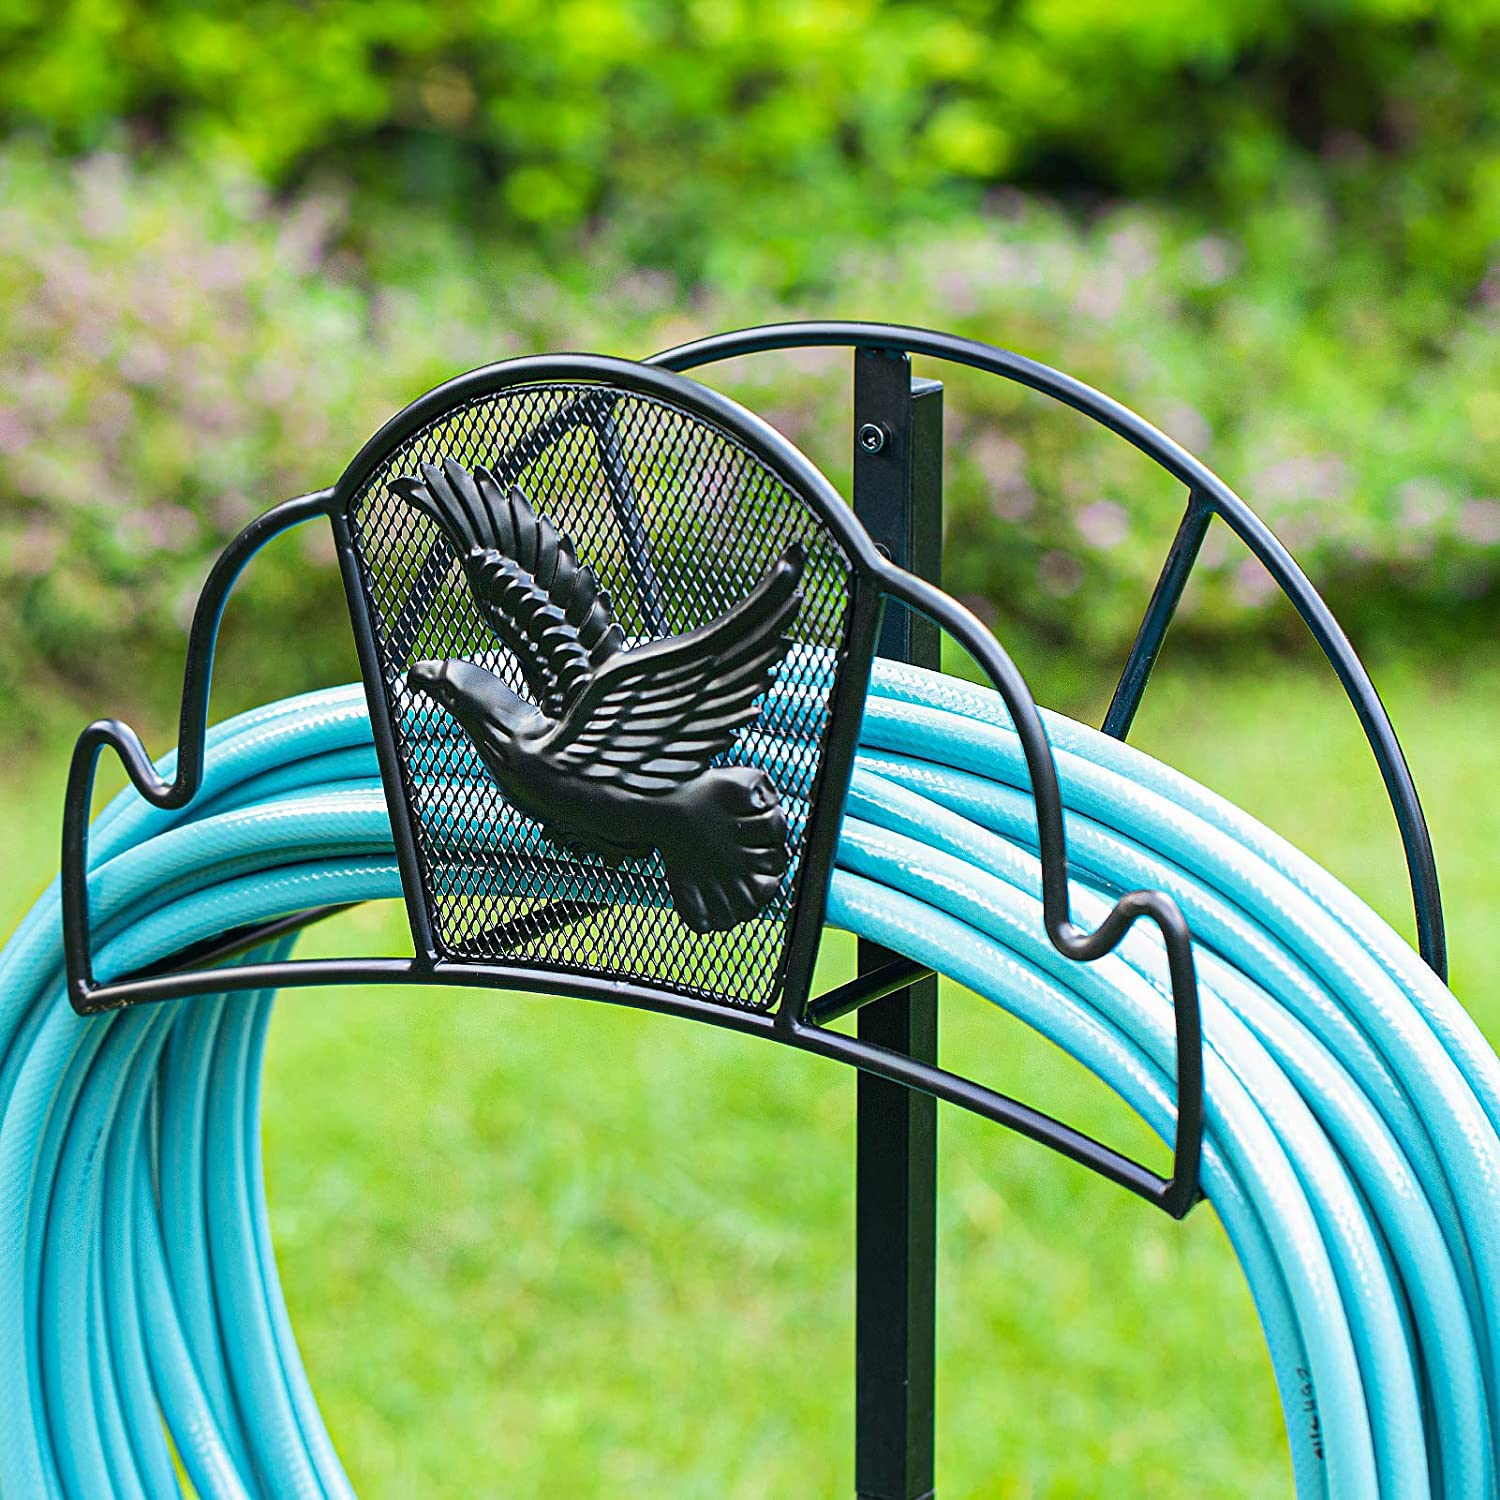 Amagabeli Garden Hose Holder Stand Freestanding for Outside Holds 125ft Water Hose Detachable Rustproof Rack Storage Hanger Stakes Heavy Duty Decorative Free Standing in Ground Garden Lawn Metal Black - image 5 of 8